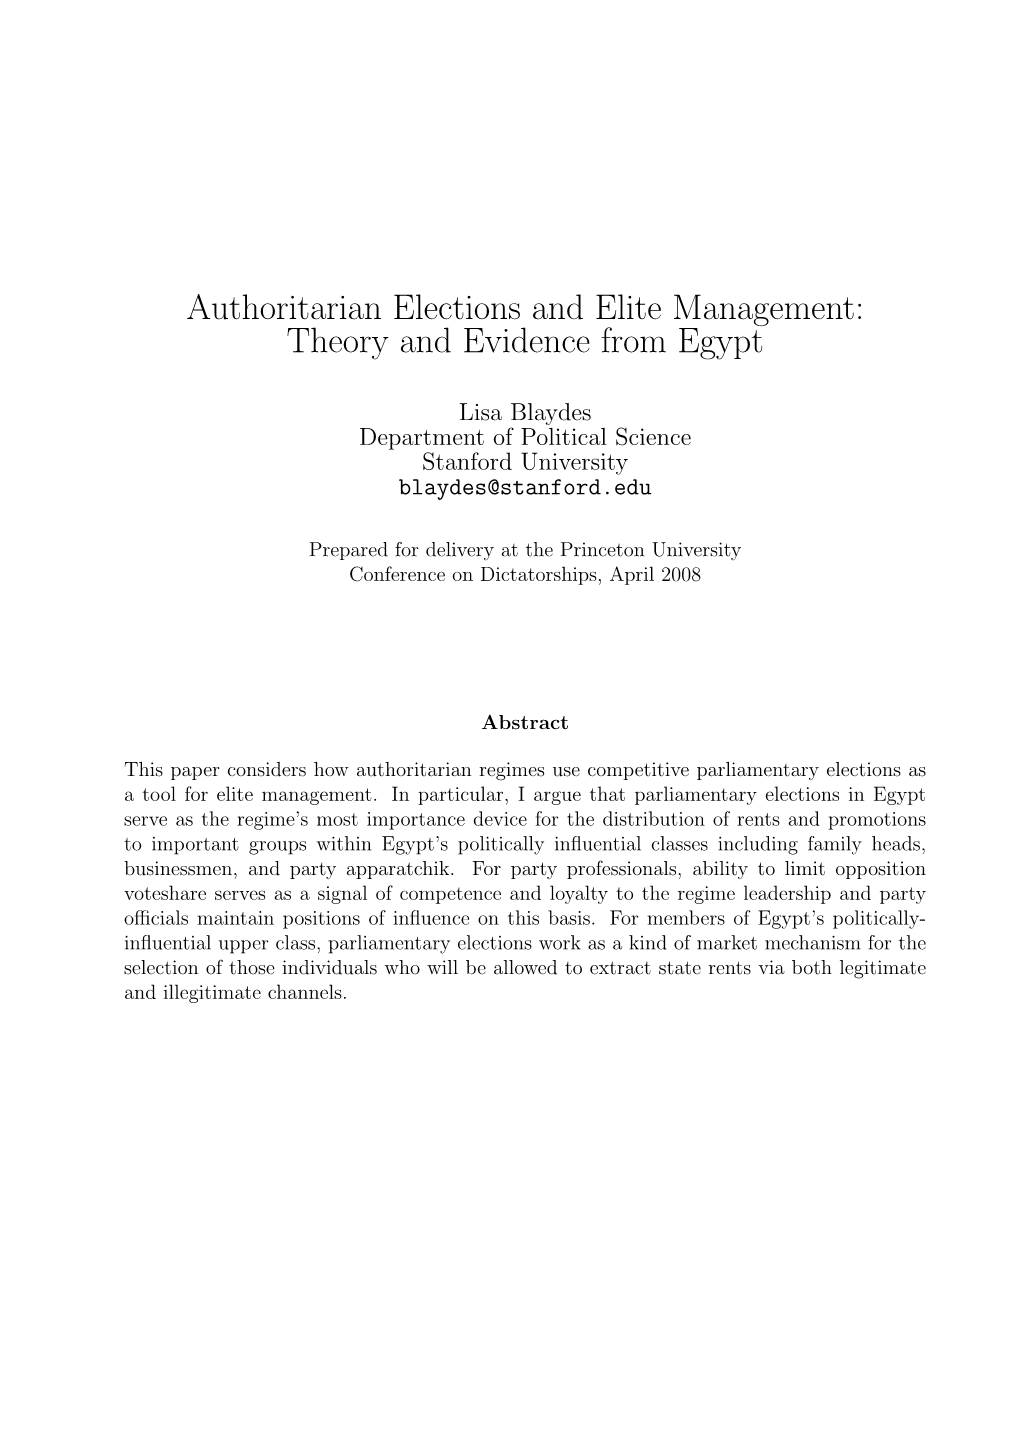 Authoritarian Elections and Elite Management: Theory and Evidence from Egypt